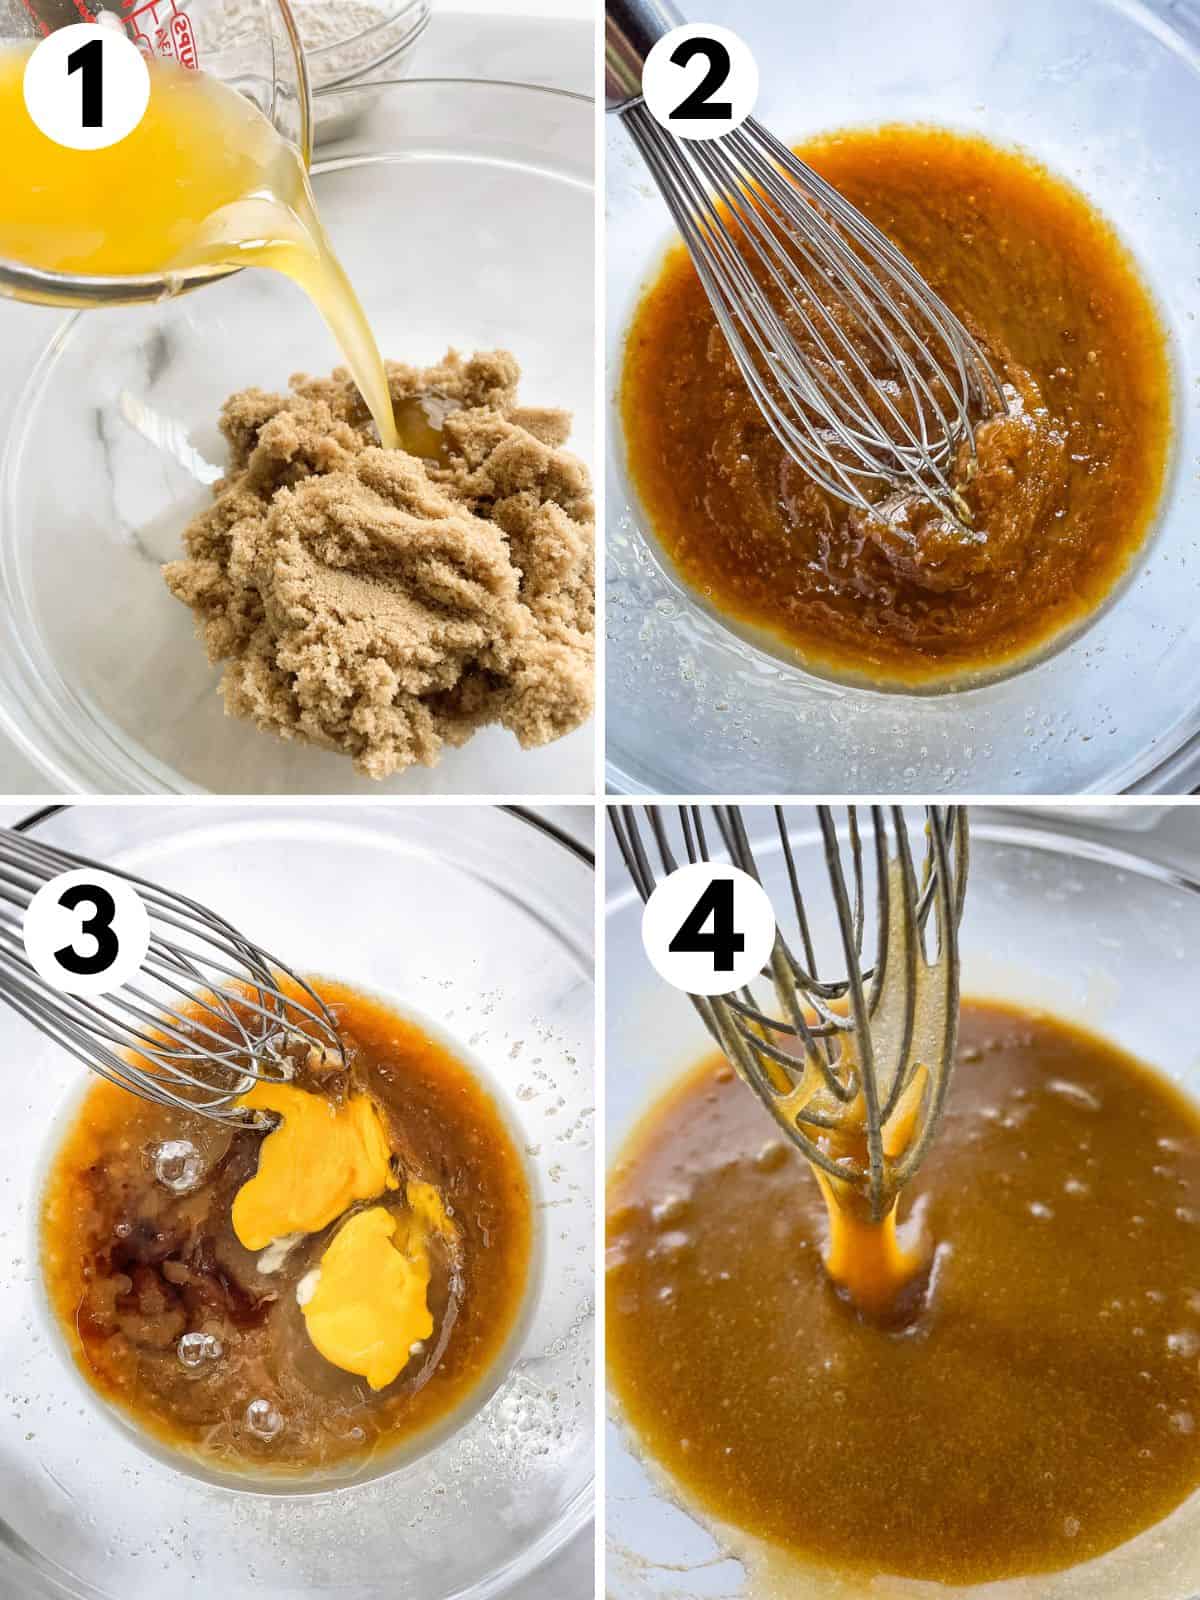 Four images. 1. Adding melted butter to brown sugar. 2. The butter and brown sugar whisked. 3. Adding eggs and vanilla. 4. The brown sugar-egg mixture blended until smooth.